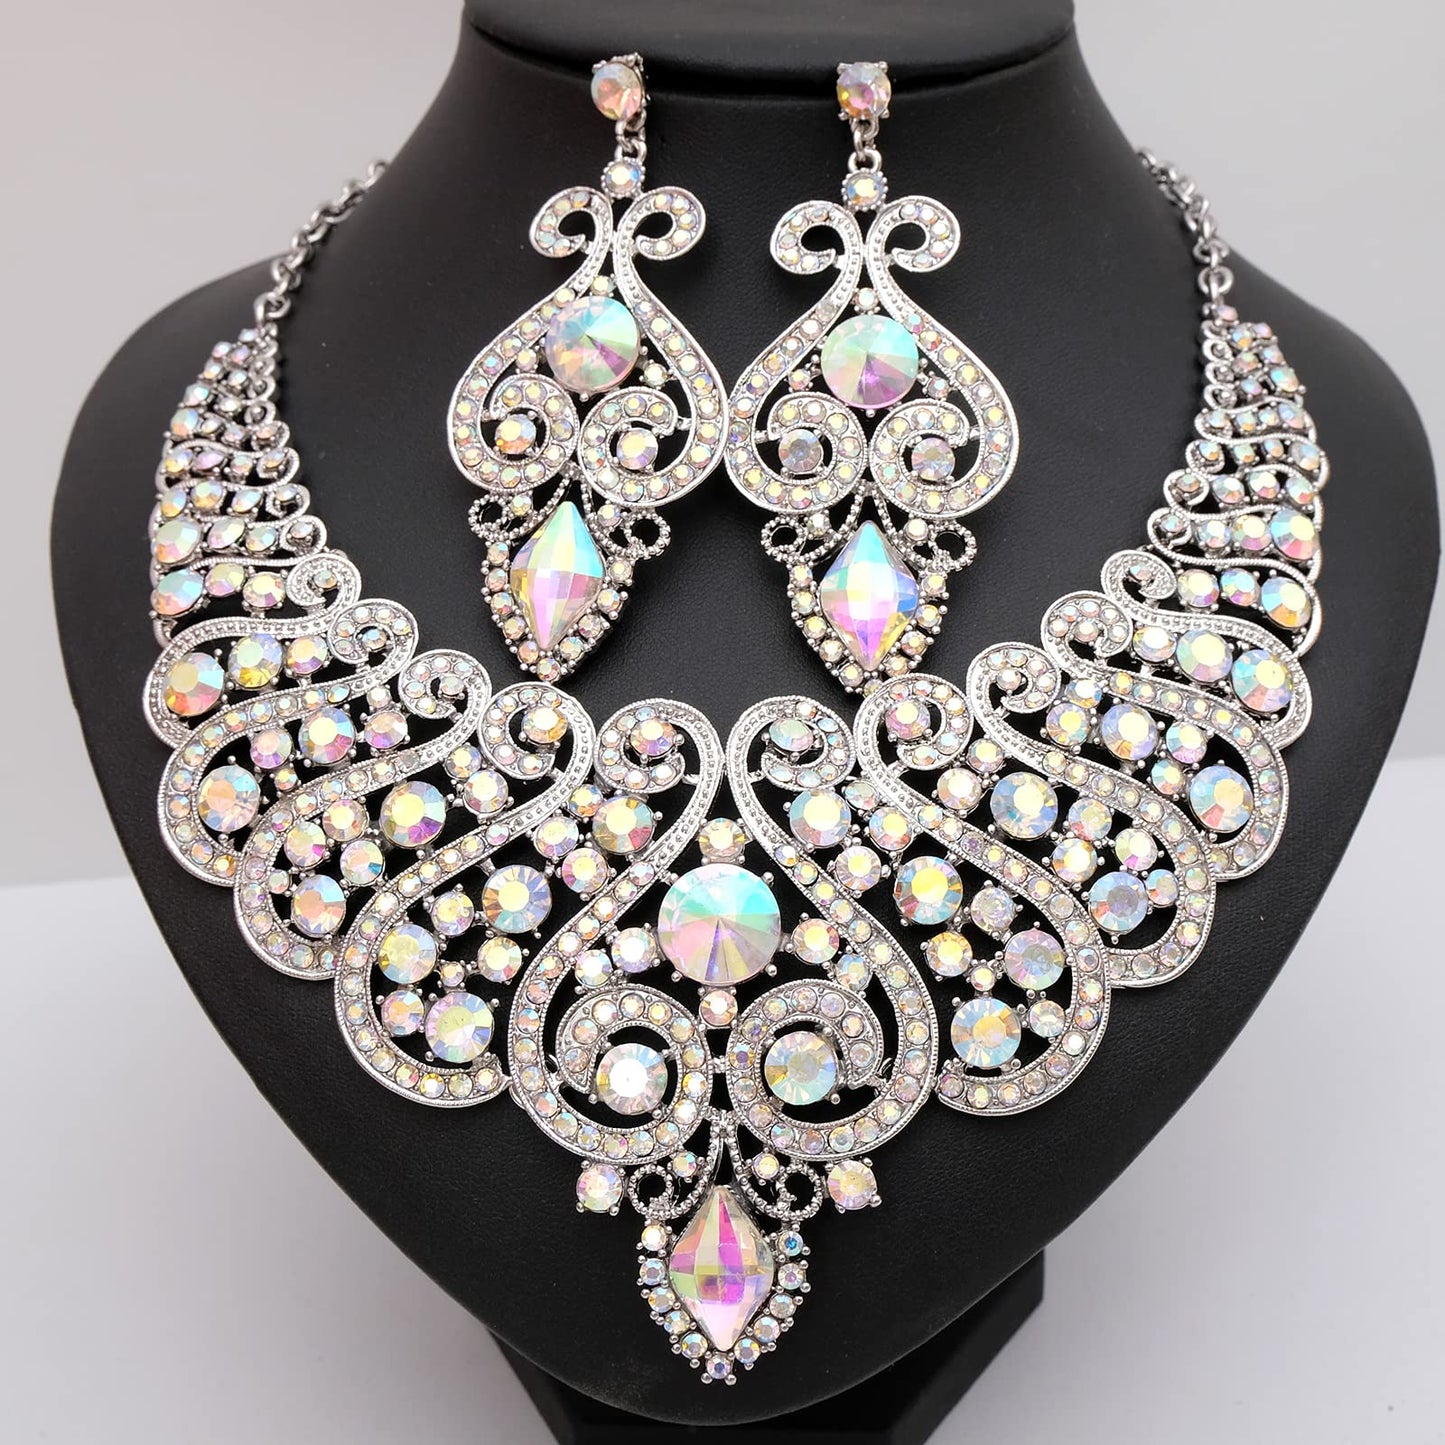 CSY Luxury Big Statement Bib Necklace Earrings Sets Wedding Party Prom Dress Costume Jewelry Set Accessories for Brides Women (AB Crystal)